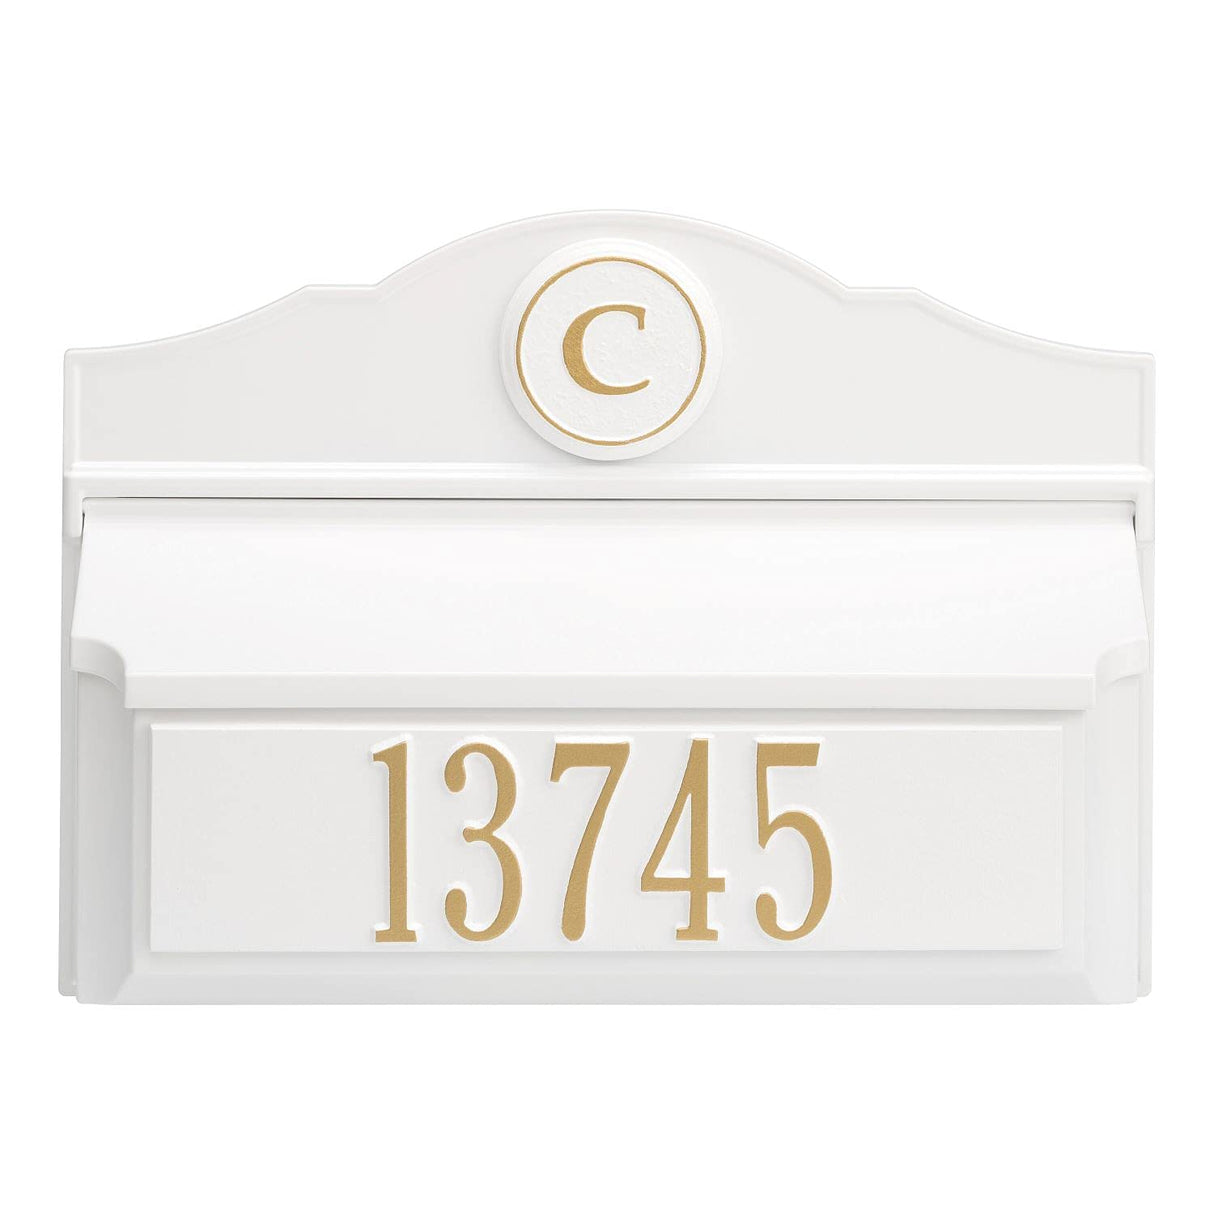 Whitehall 11250 - Colonial Wall Mailbox Package #1 (Mailbox, Plaque & Monogram)